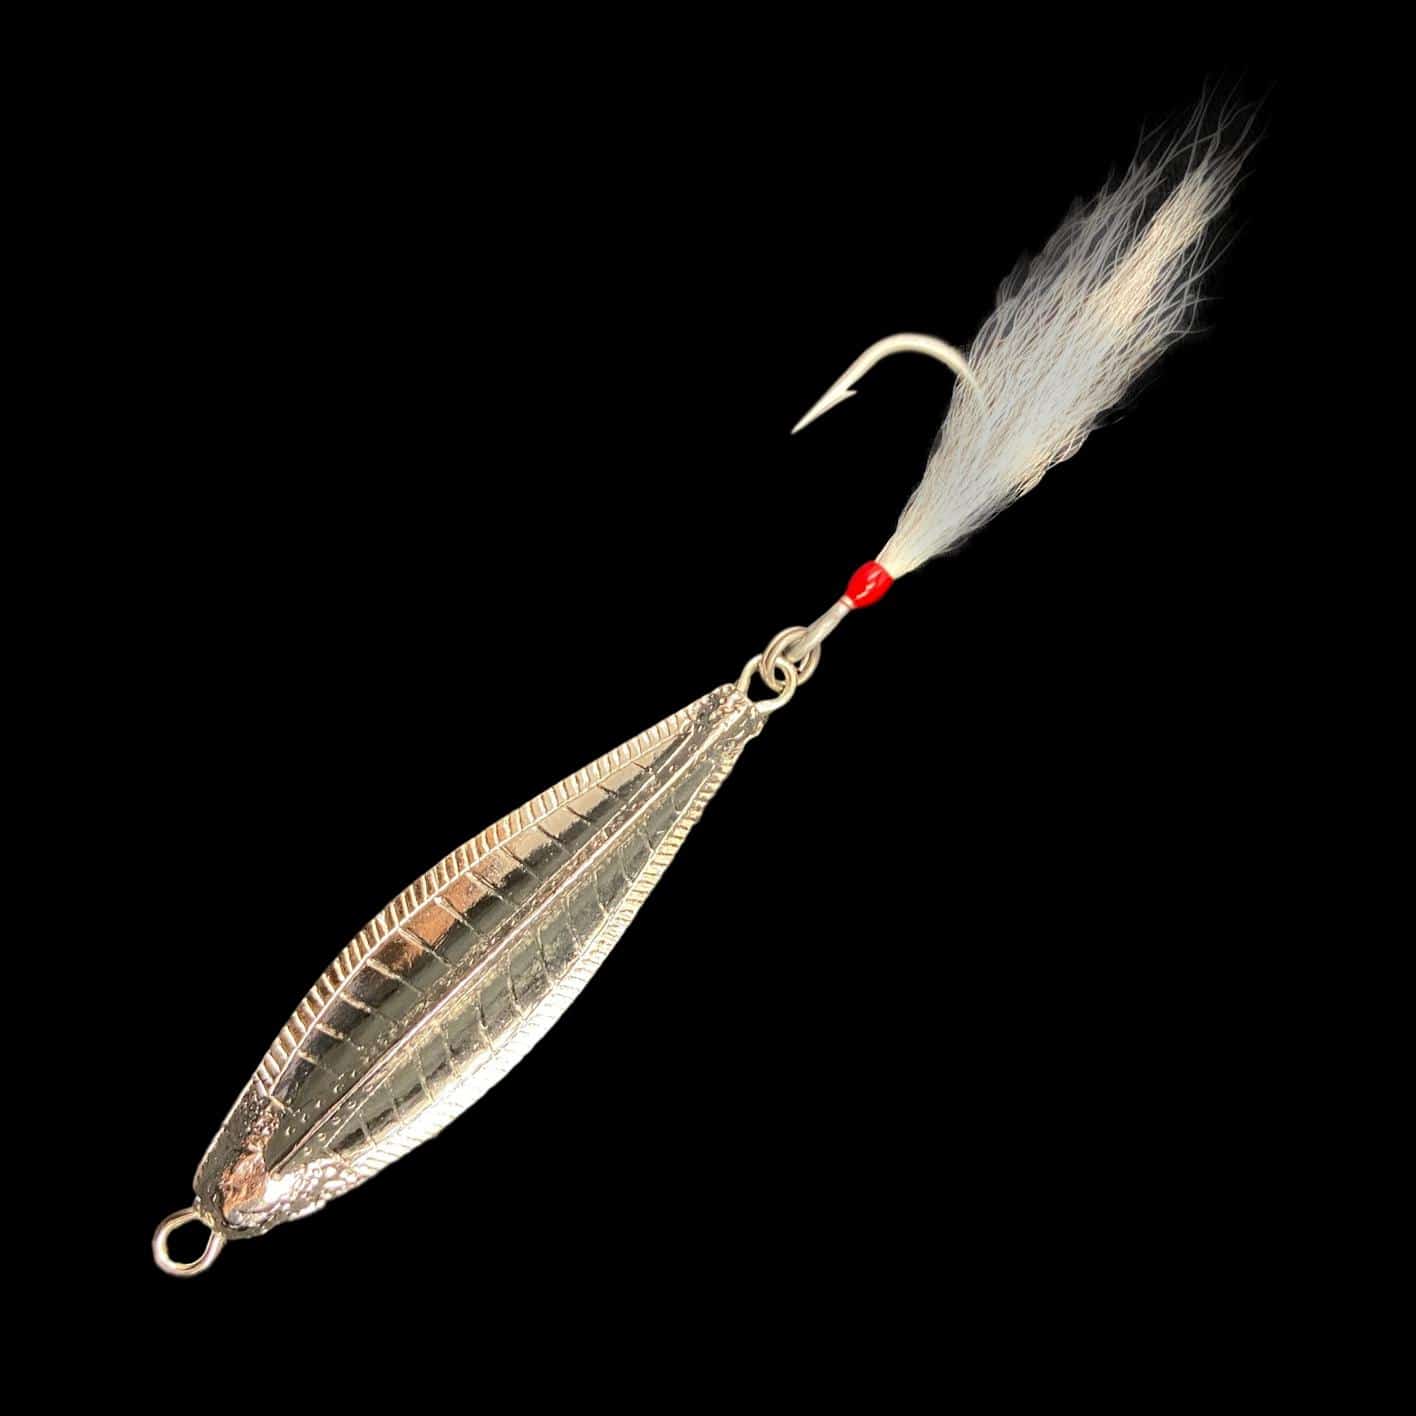 DELONG LURES: Bluegill Fishing Lures, Made in America Valure 12 Pack, 1.5  pre-Rigged Tadpole Lures for panfishing, Used as a Jerk Bait or Under a